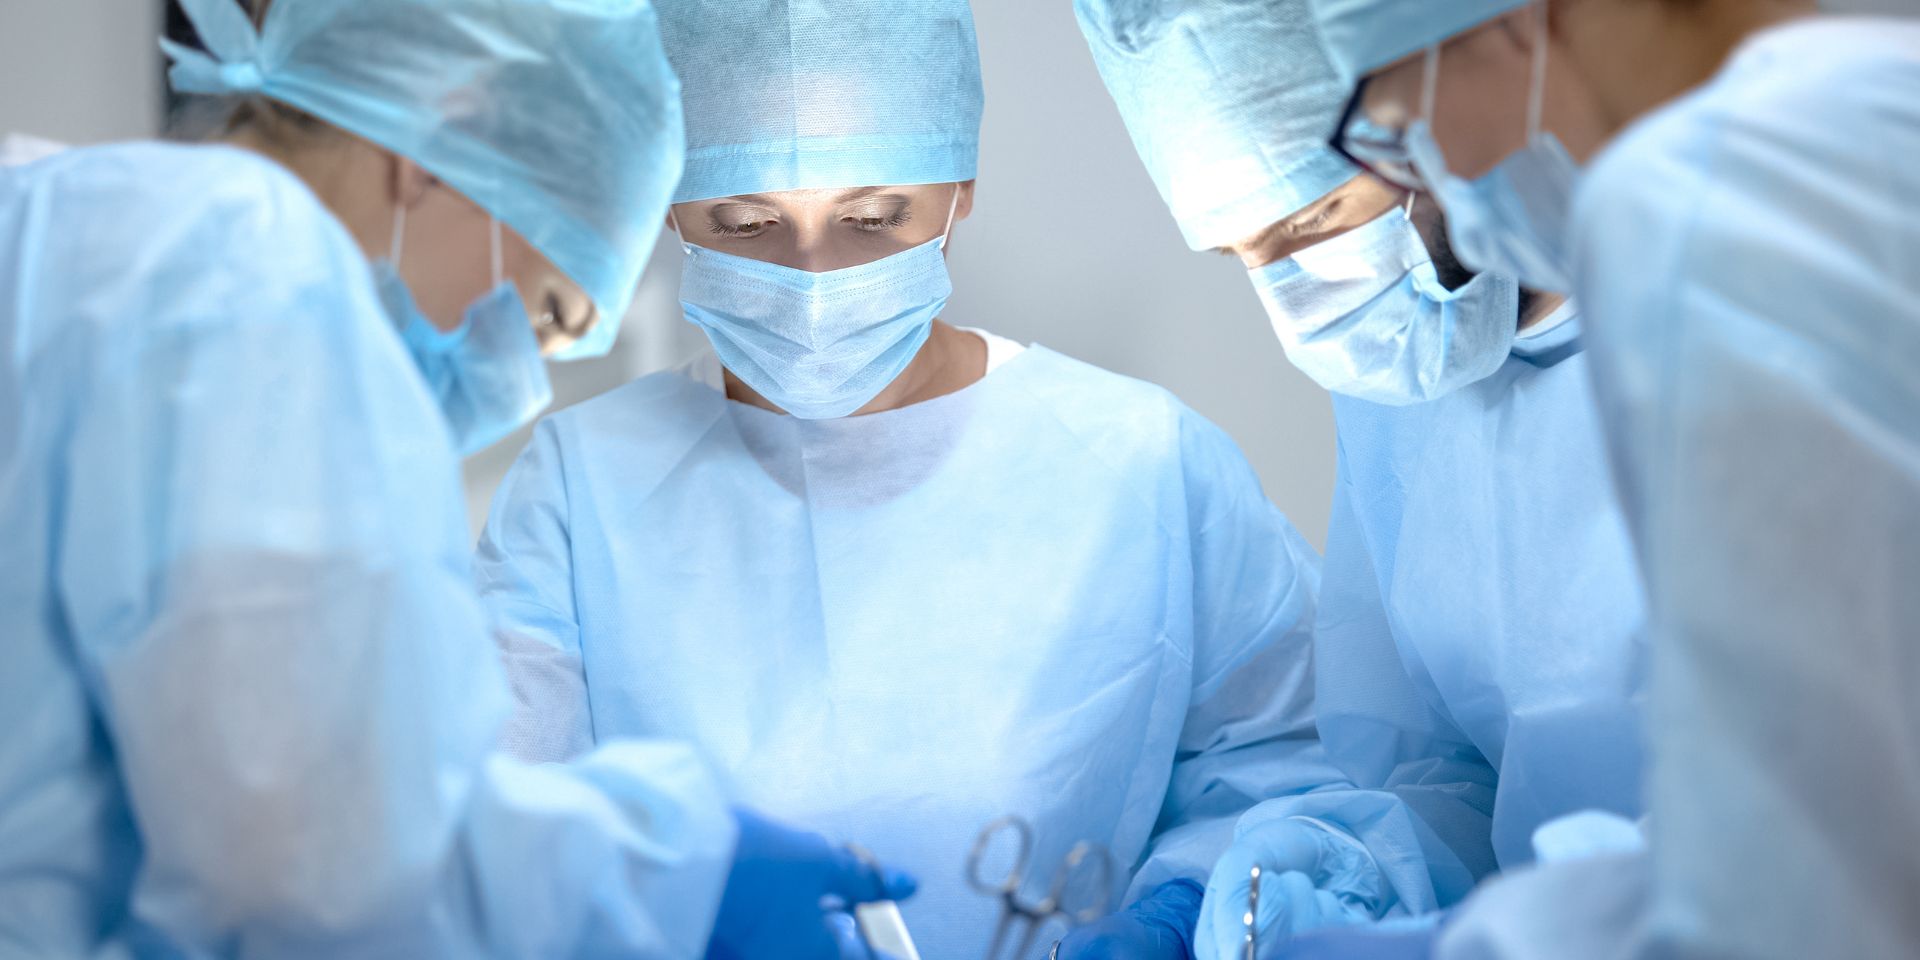 Surgical operating team performing chest surgery in a hospital